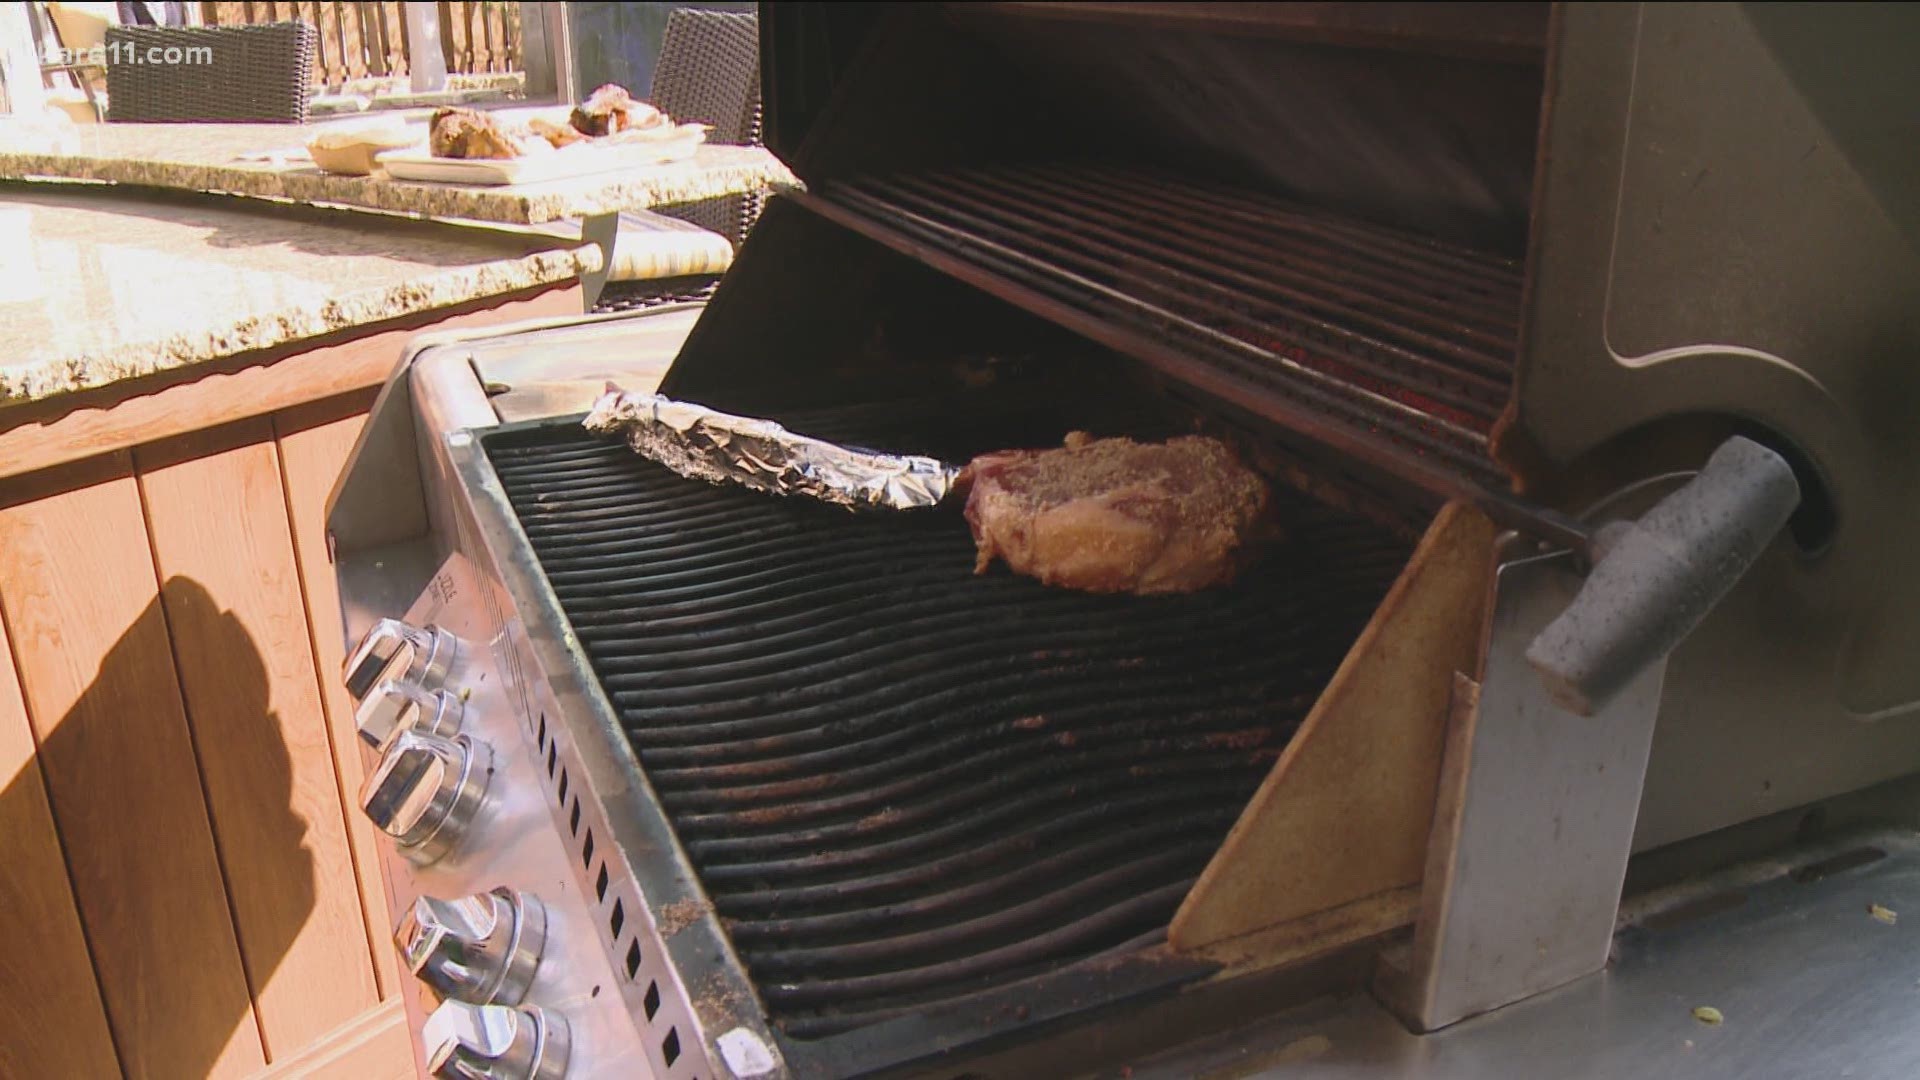 Chef Brian Ingram from Woodfired Cantina shows off his recipes for Tomahawk Steak and Charred Spatchcock Chicken.